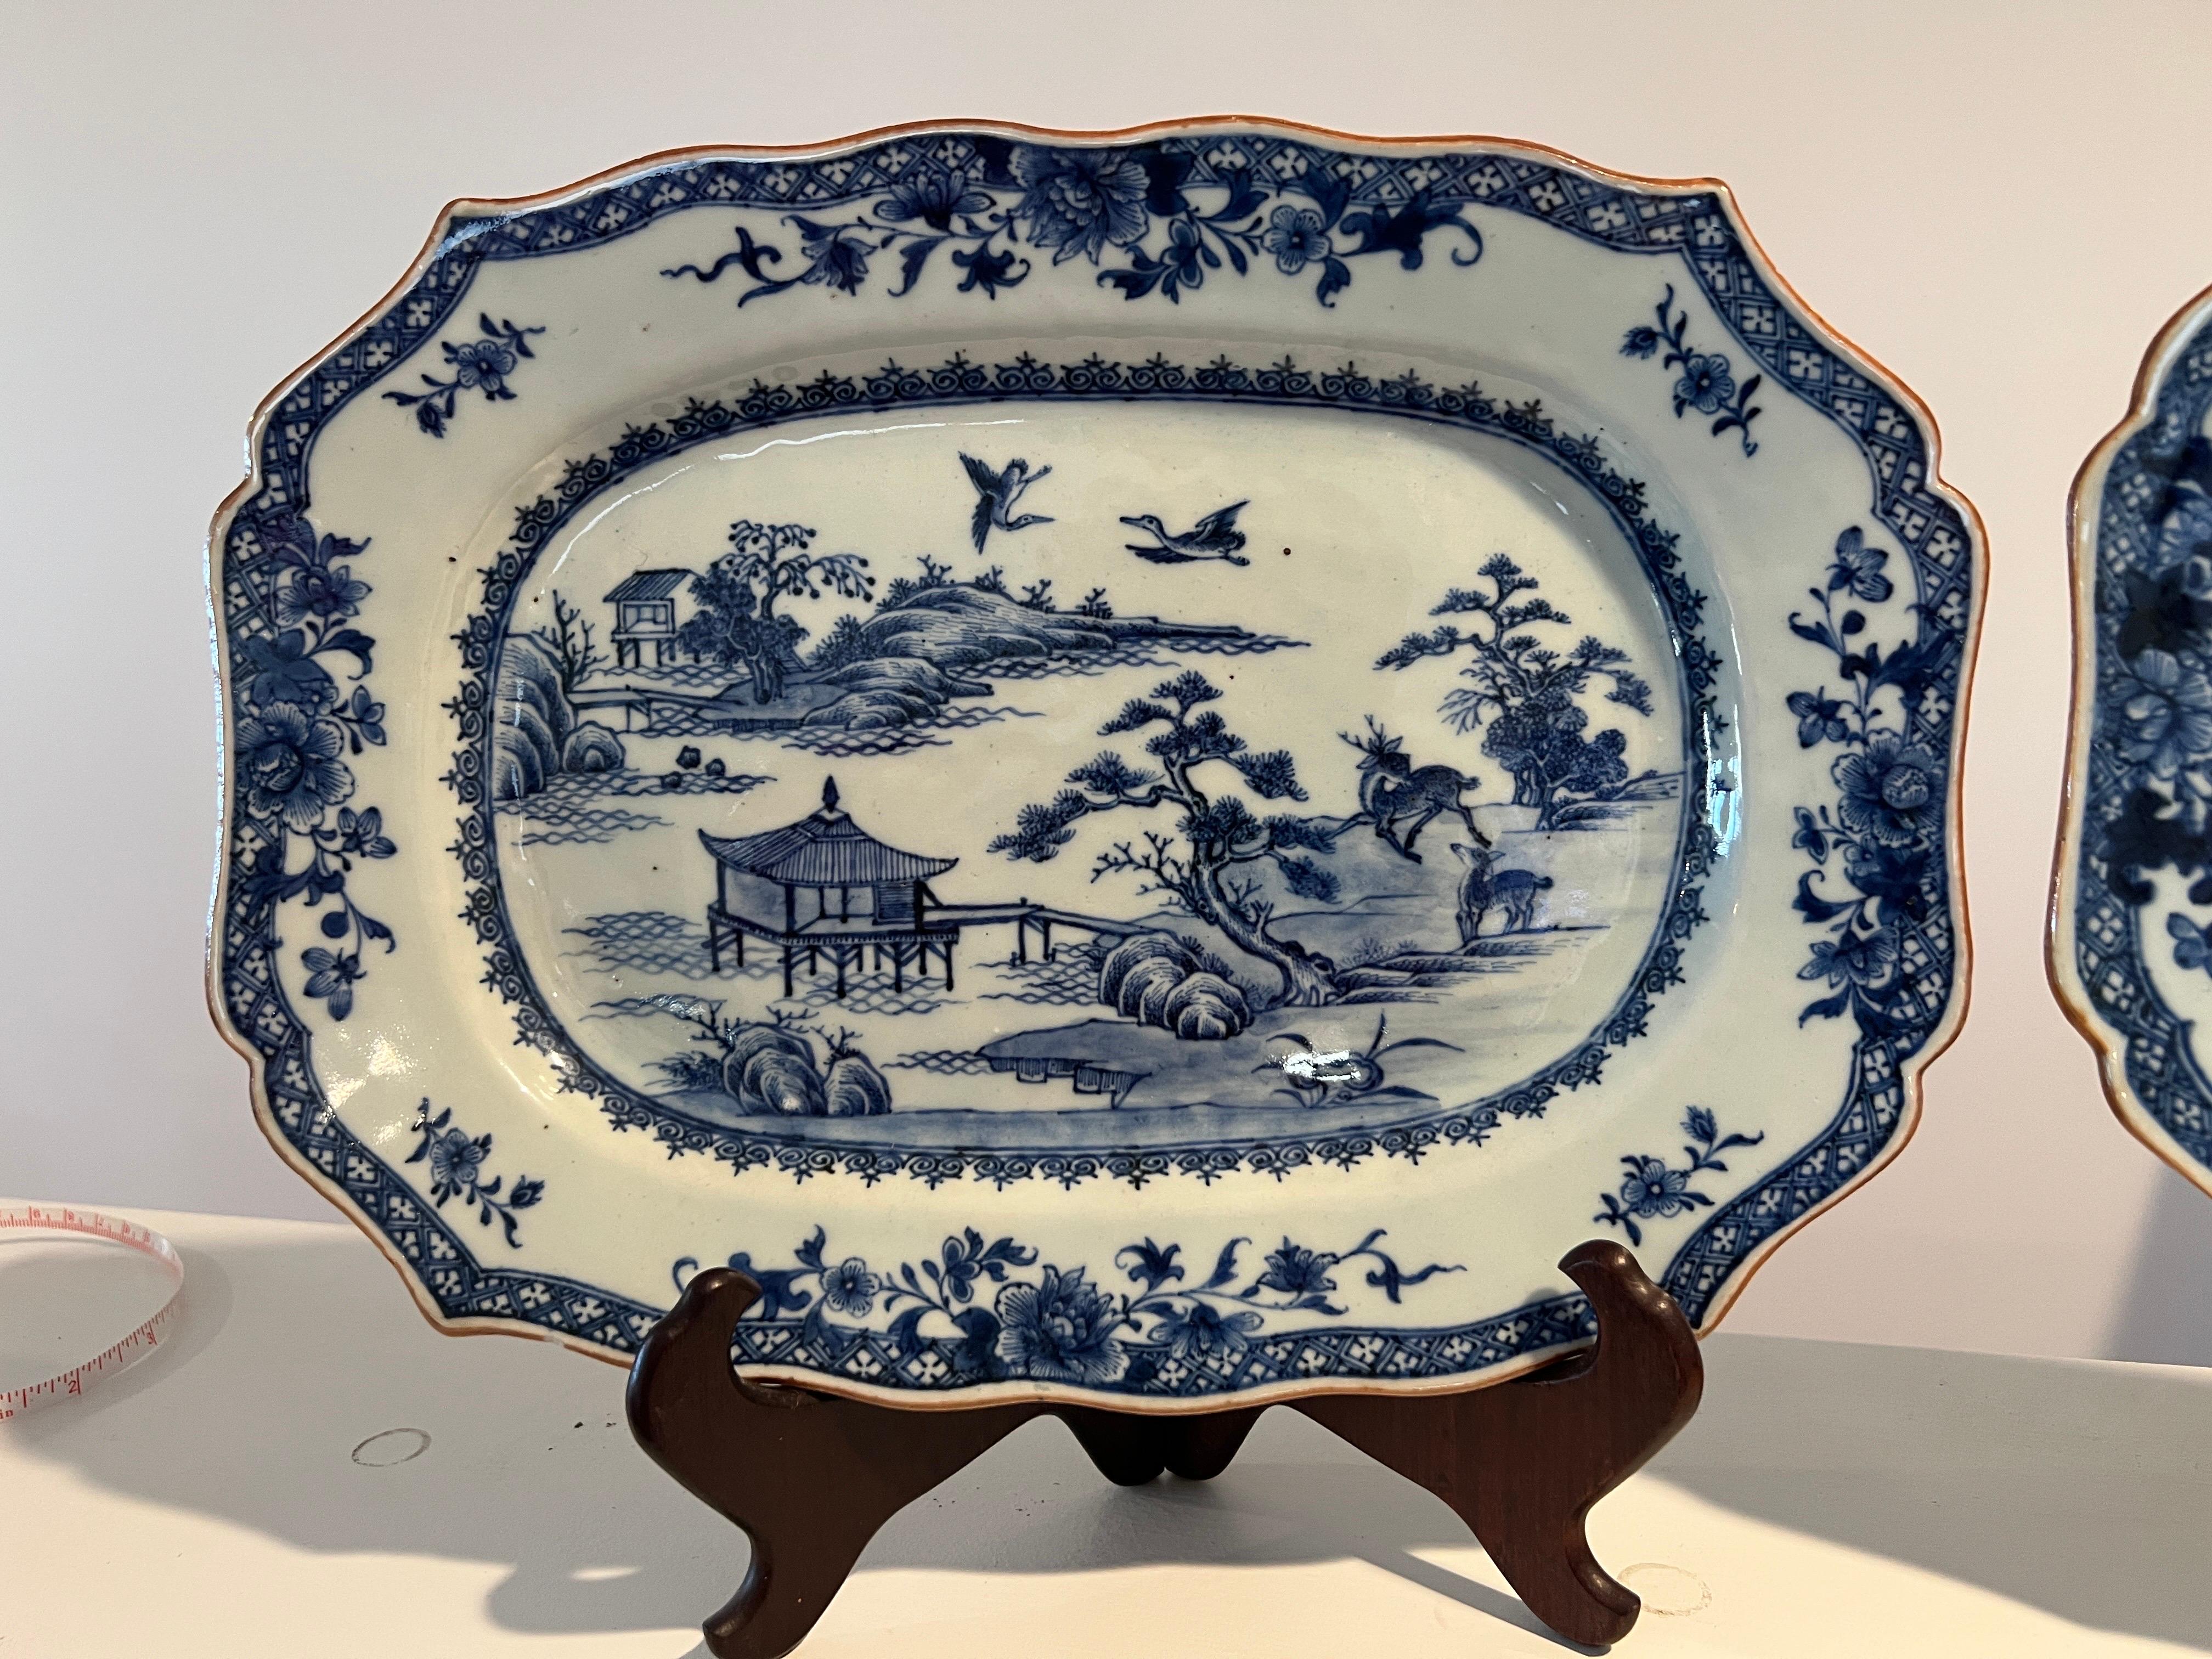 Chinese export, Qing Period (1644-1795) and Qianlong Dynasty (1735-1796), circa 1770. 

A matched pair of period Chinese Export porcelain platters or serving dishes with a fine quality blue and white underglaze and brown edges. The exterior rim of